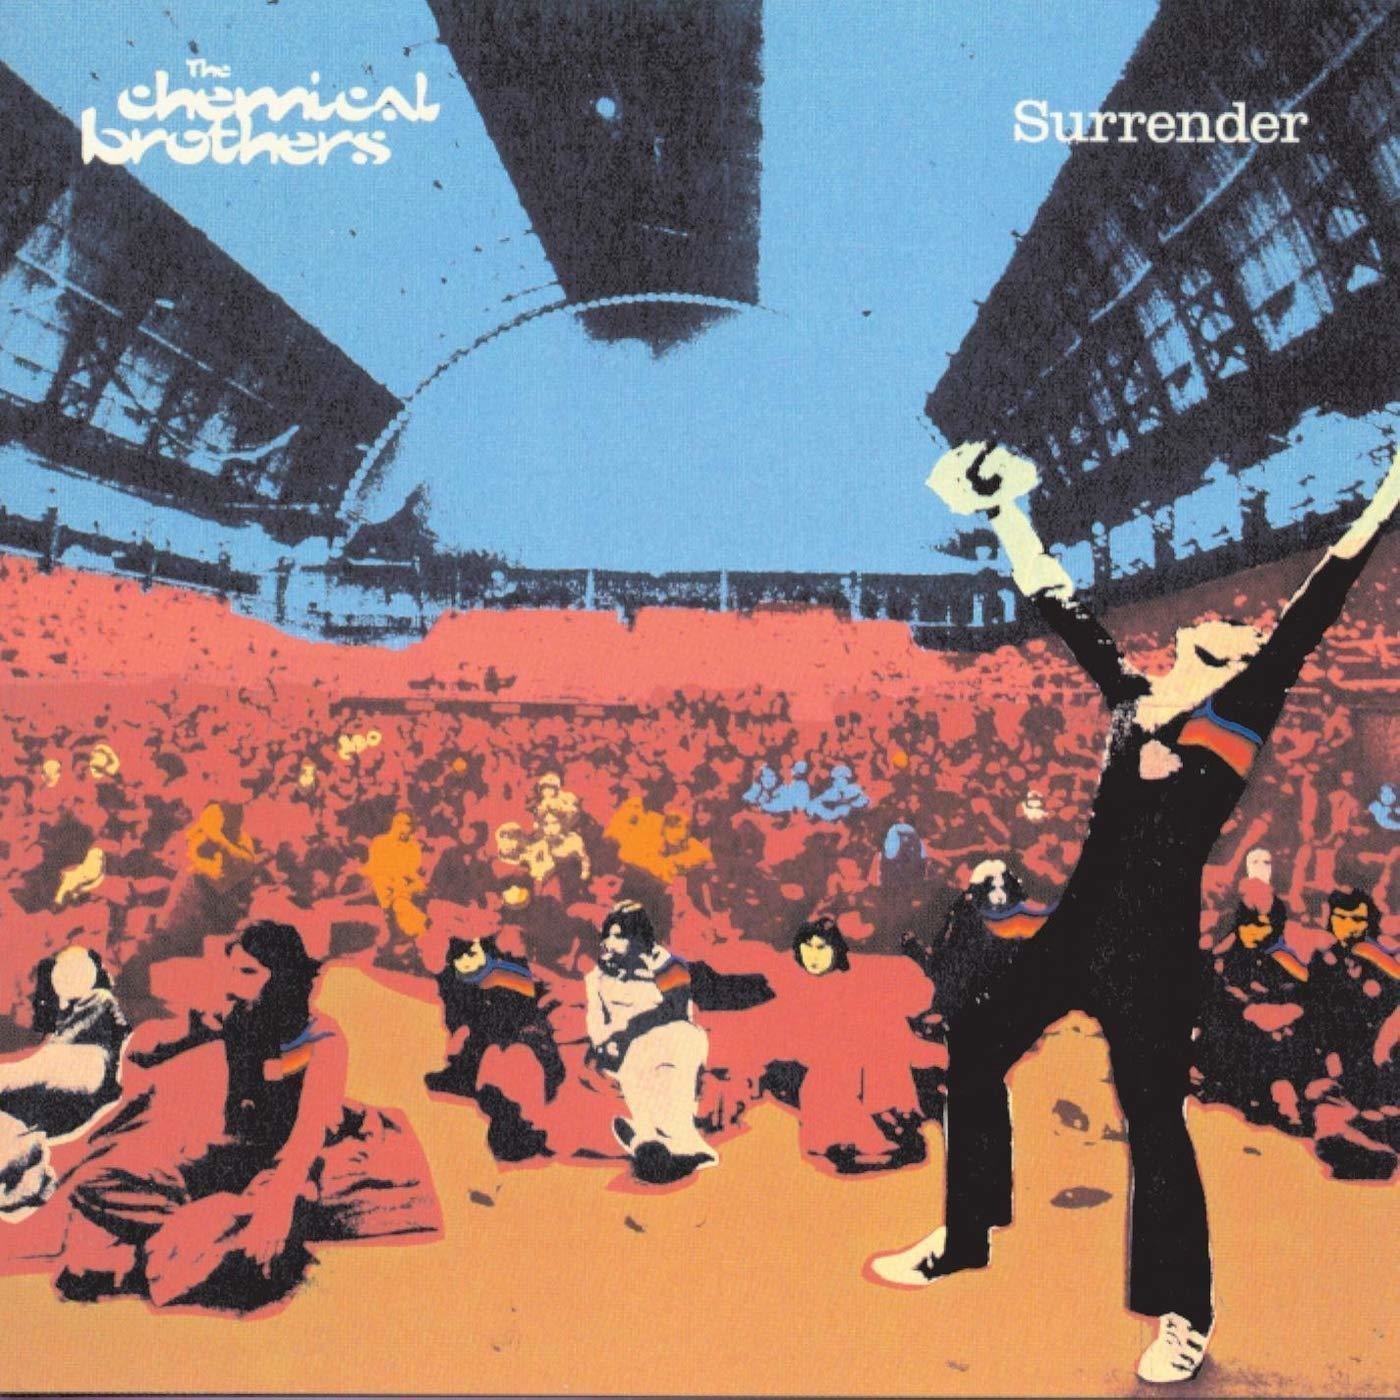 Płyta winylowa The Chemical Brothers - Surrender (4 LP + DVD)